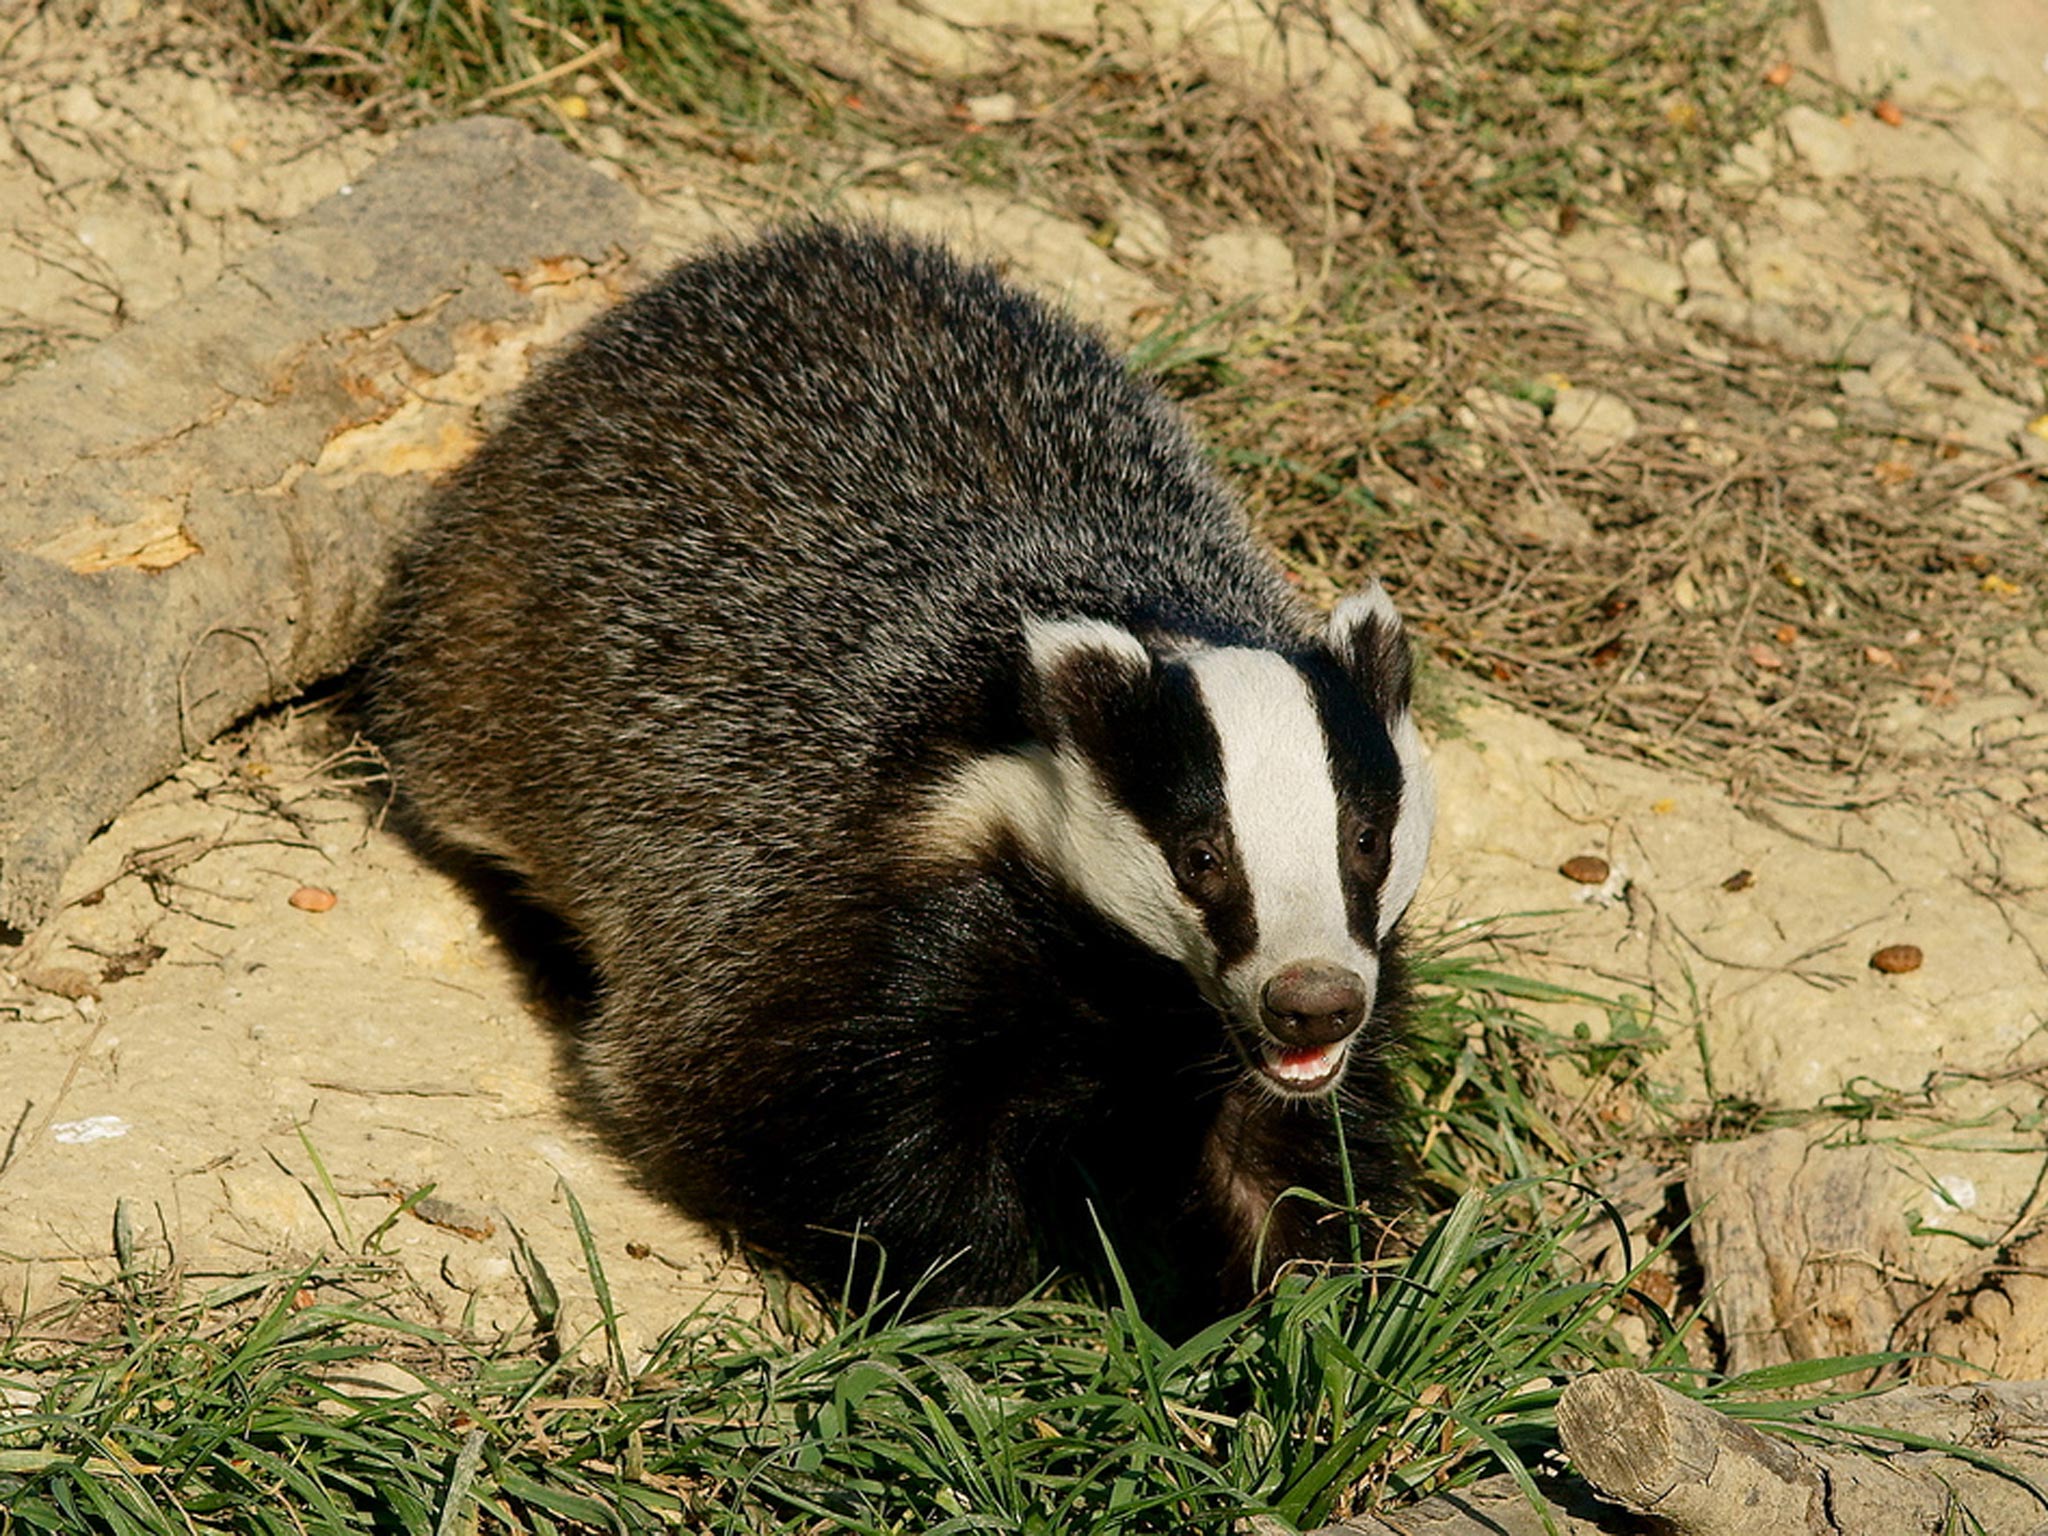 Plans to extend the badger cull have been put on hold after Defra deemed it to be unsafe and ineffective